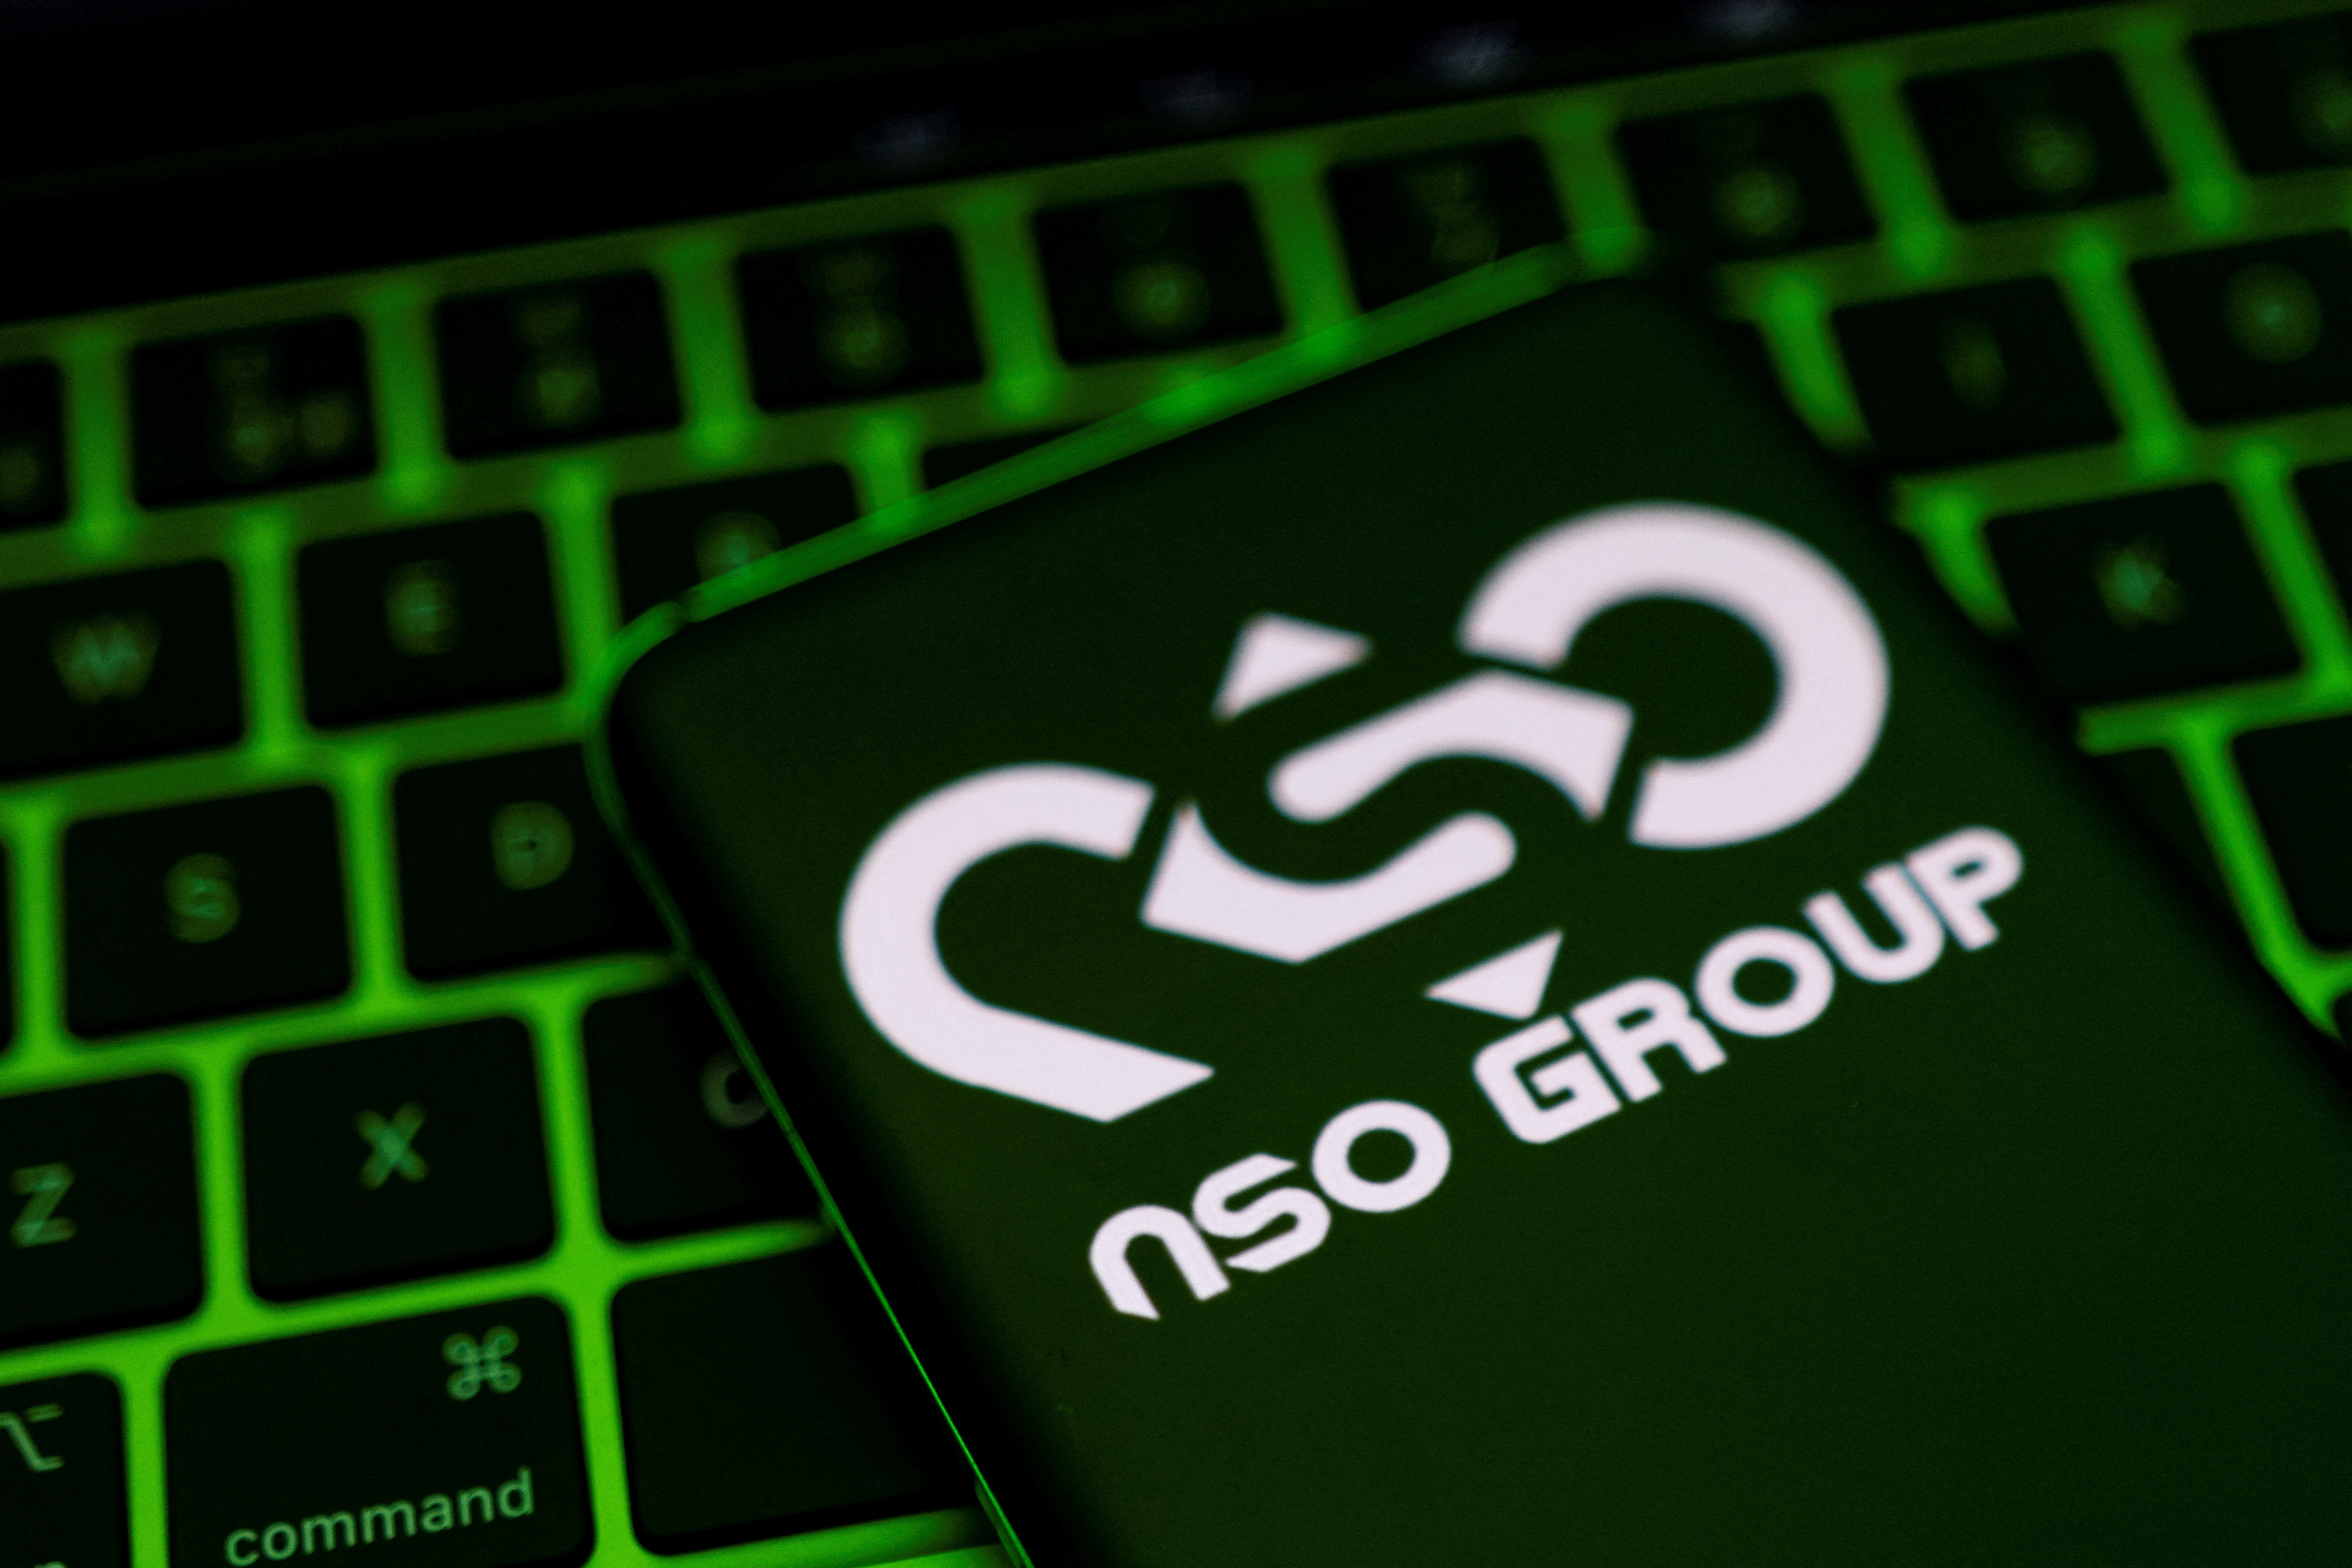 Illustration shows NSO Group logo